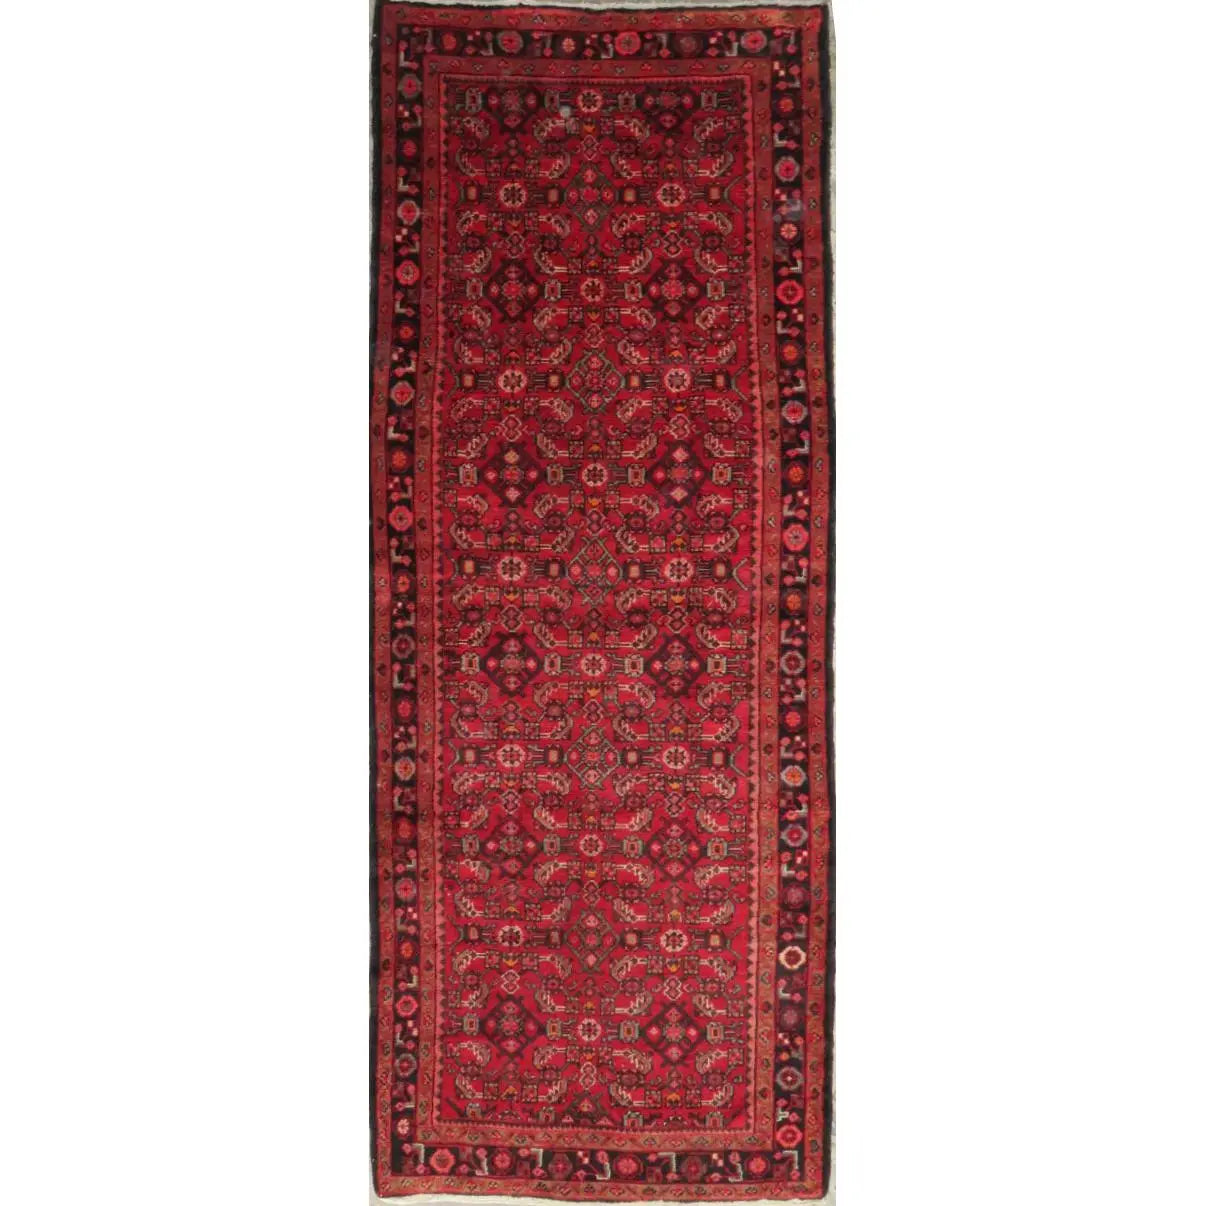 Hand-Knotted Persian Wool Rug _ Luxurious Vintage Design, 9'8" x 3'8"", Artisan Crafted